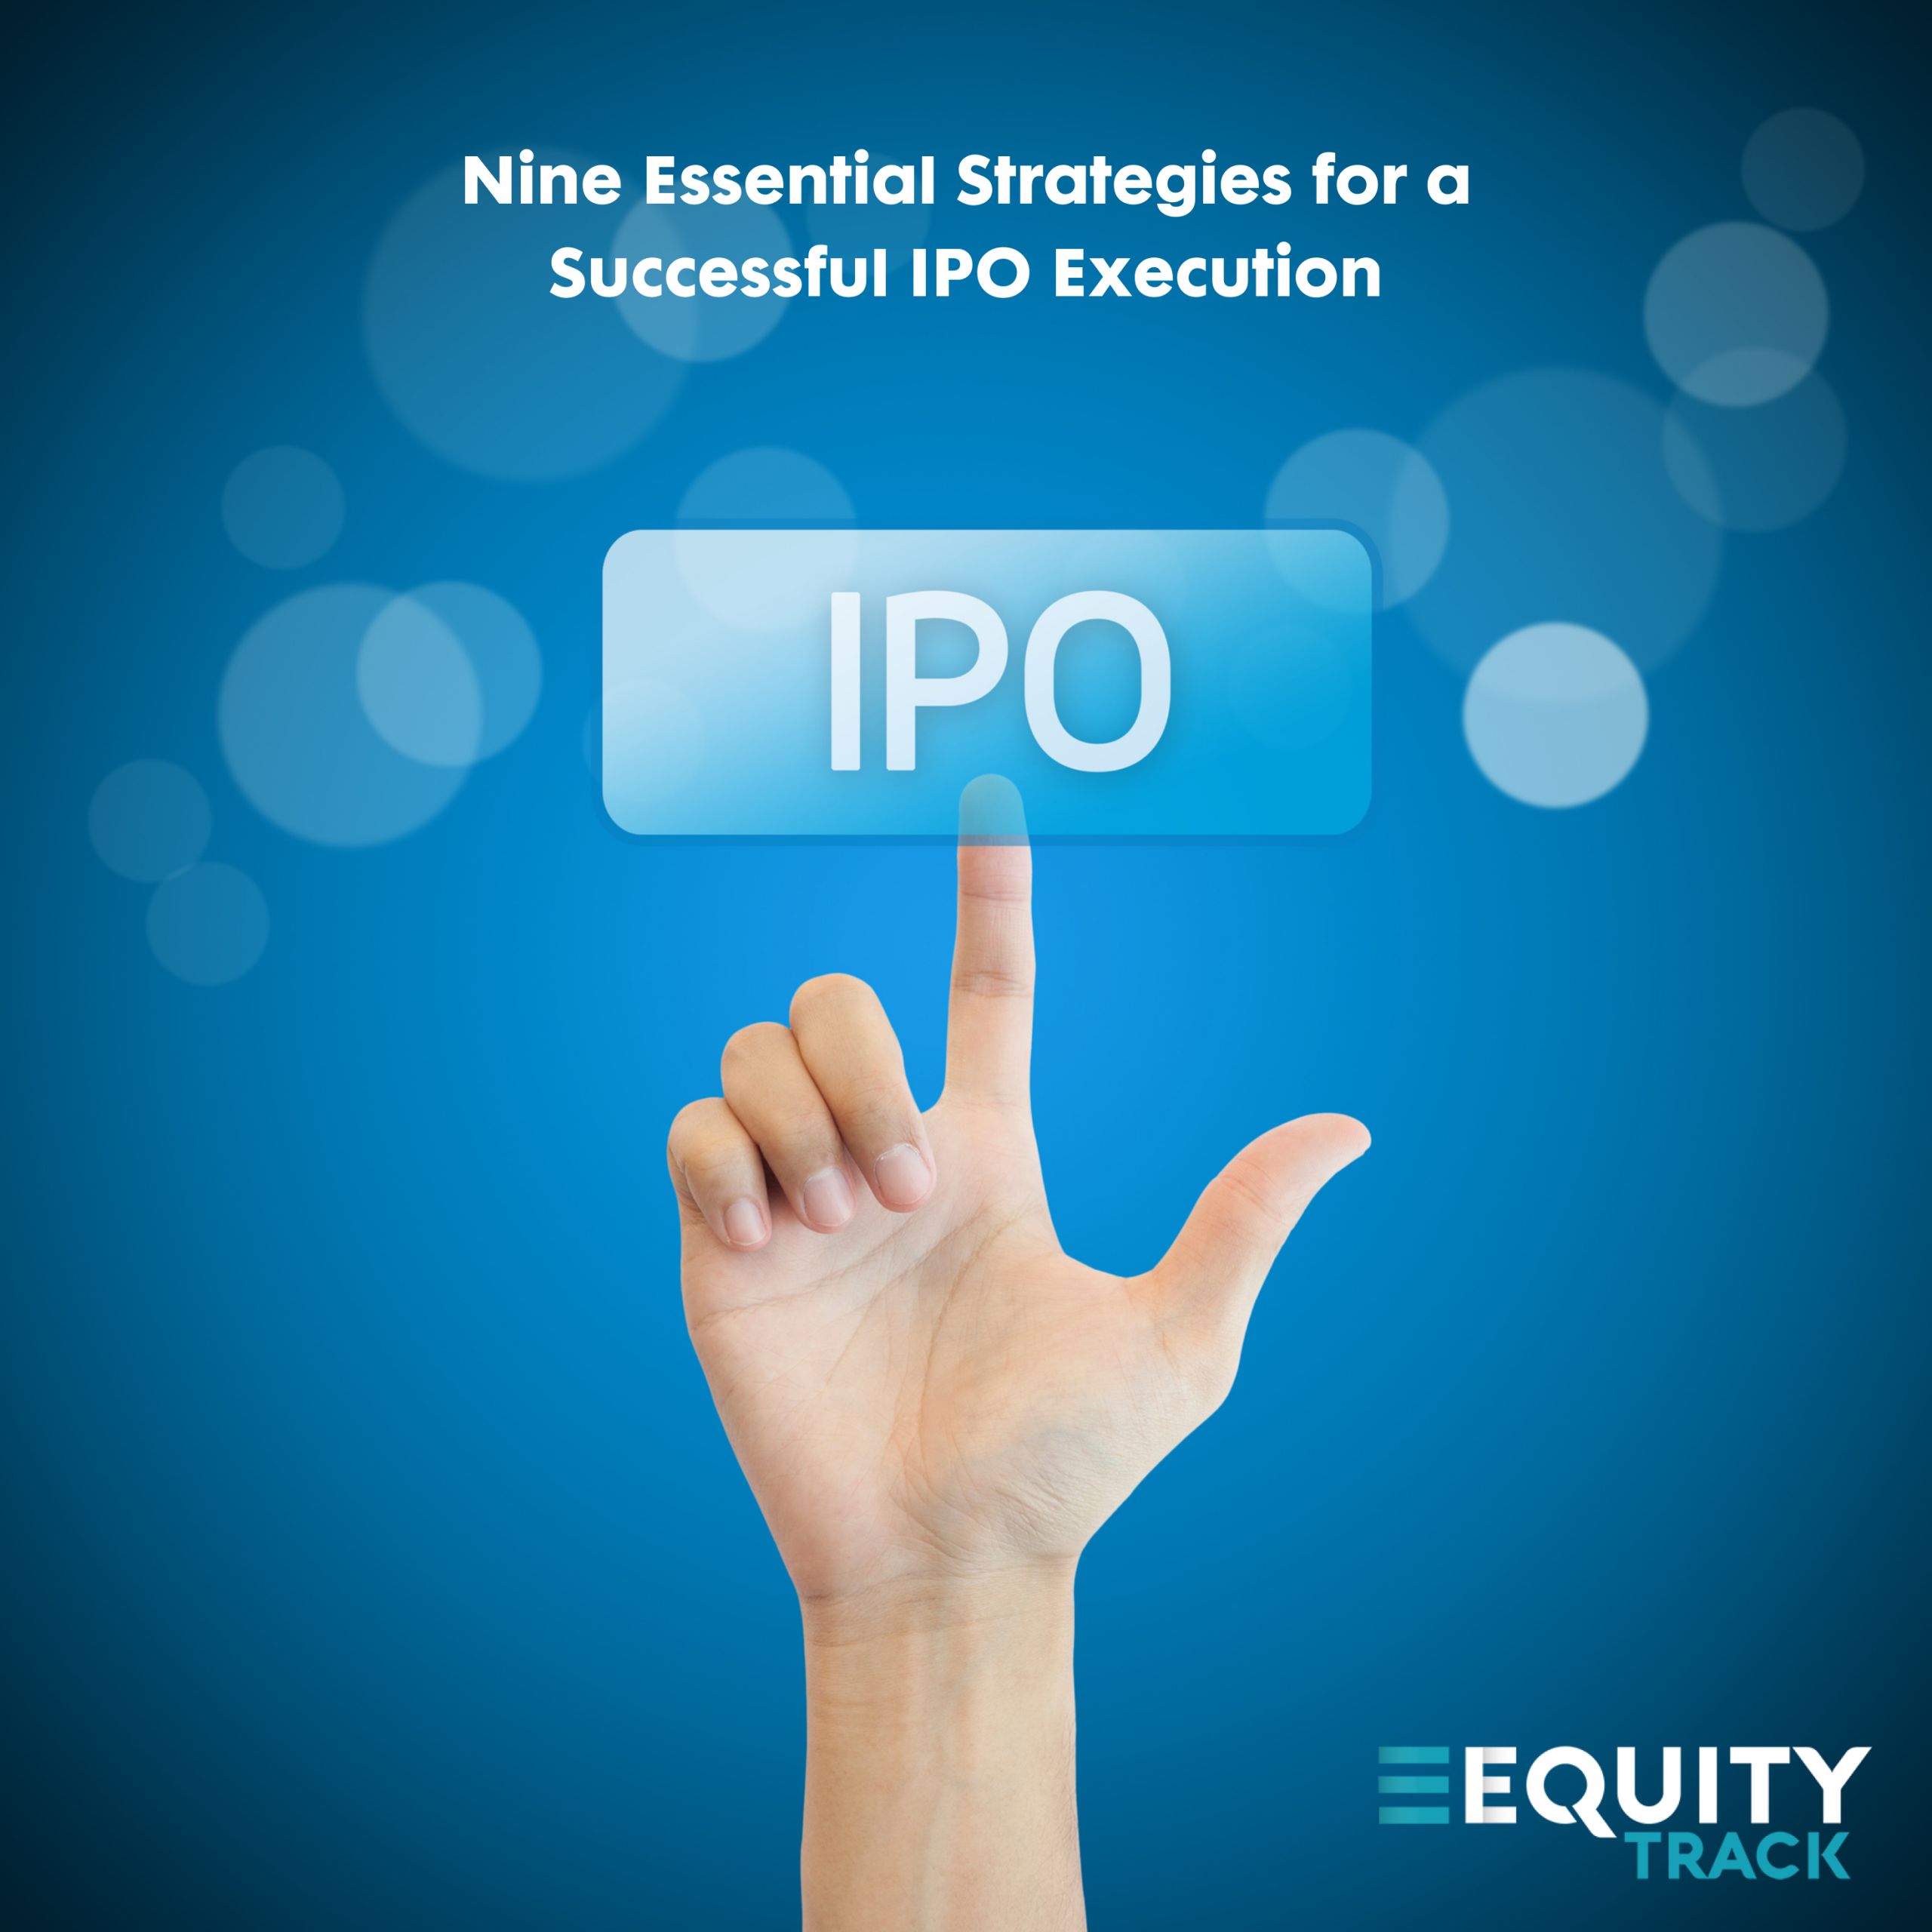 Top 9 Tips to Conduct a Successful IPO